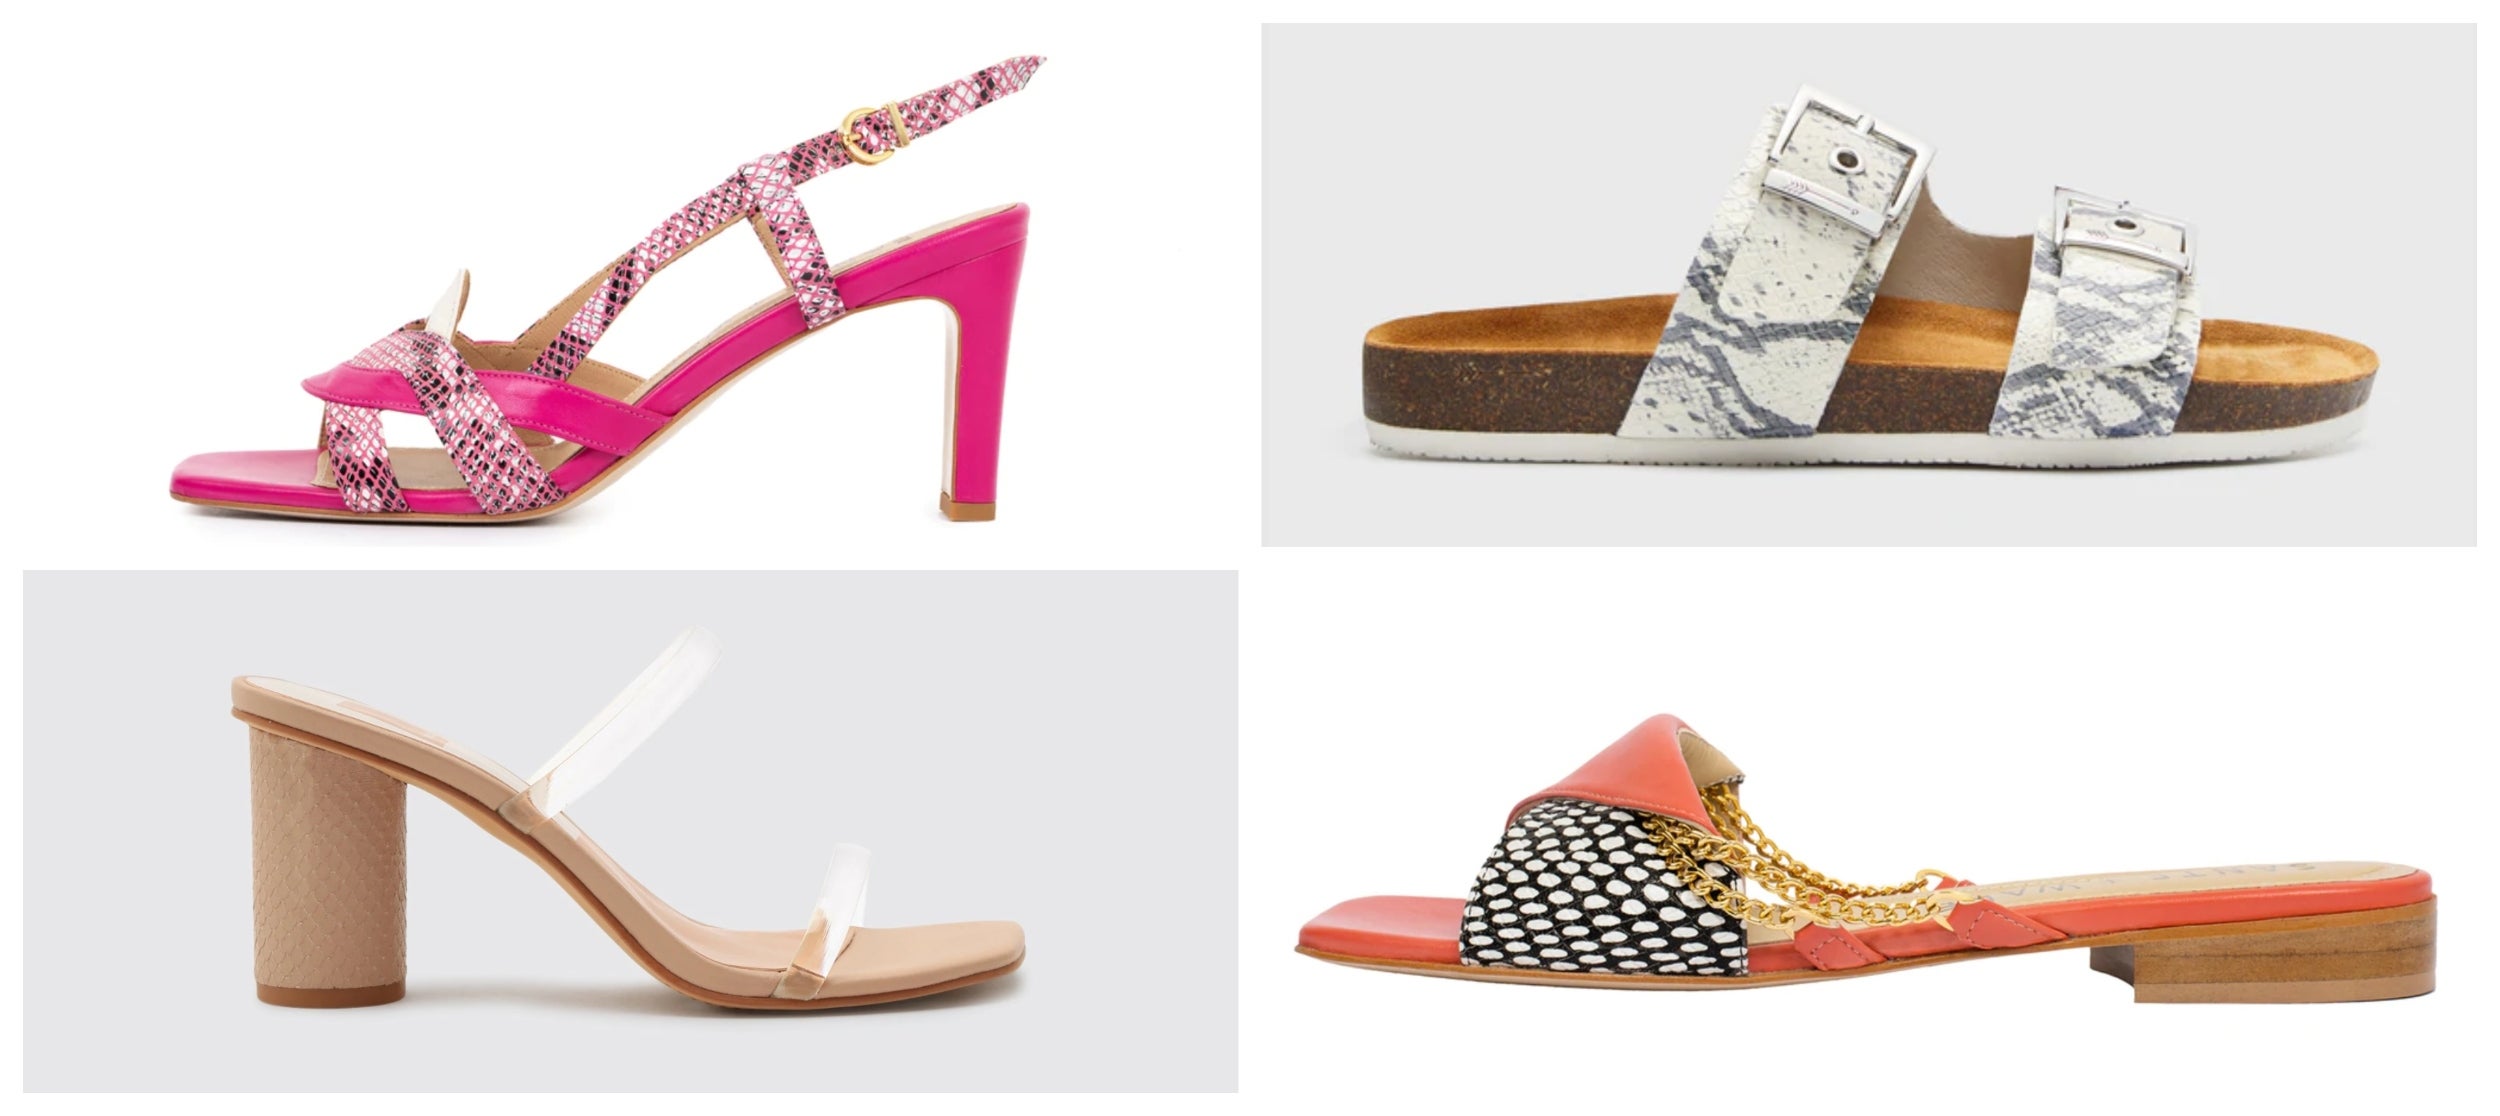 Sandal Season! Where To Shop For Sandals If You Have Wide Feet